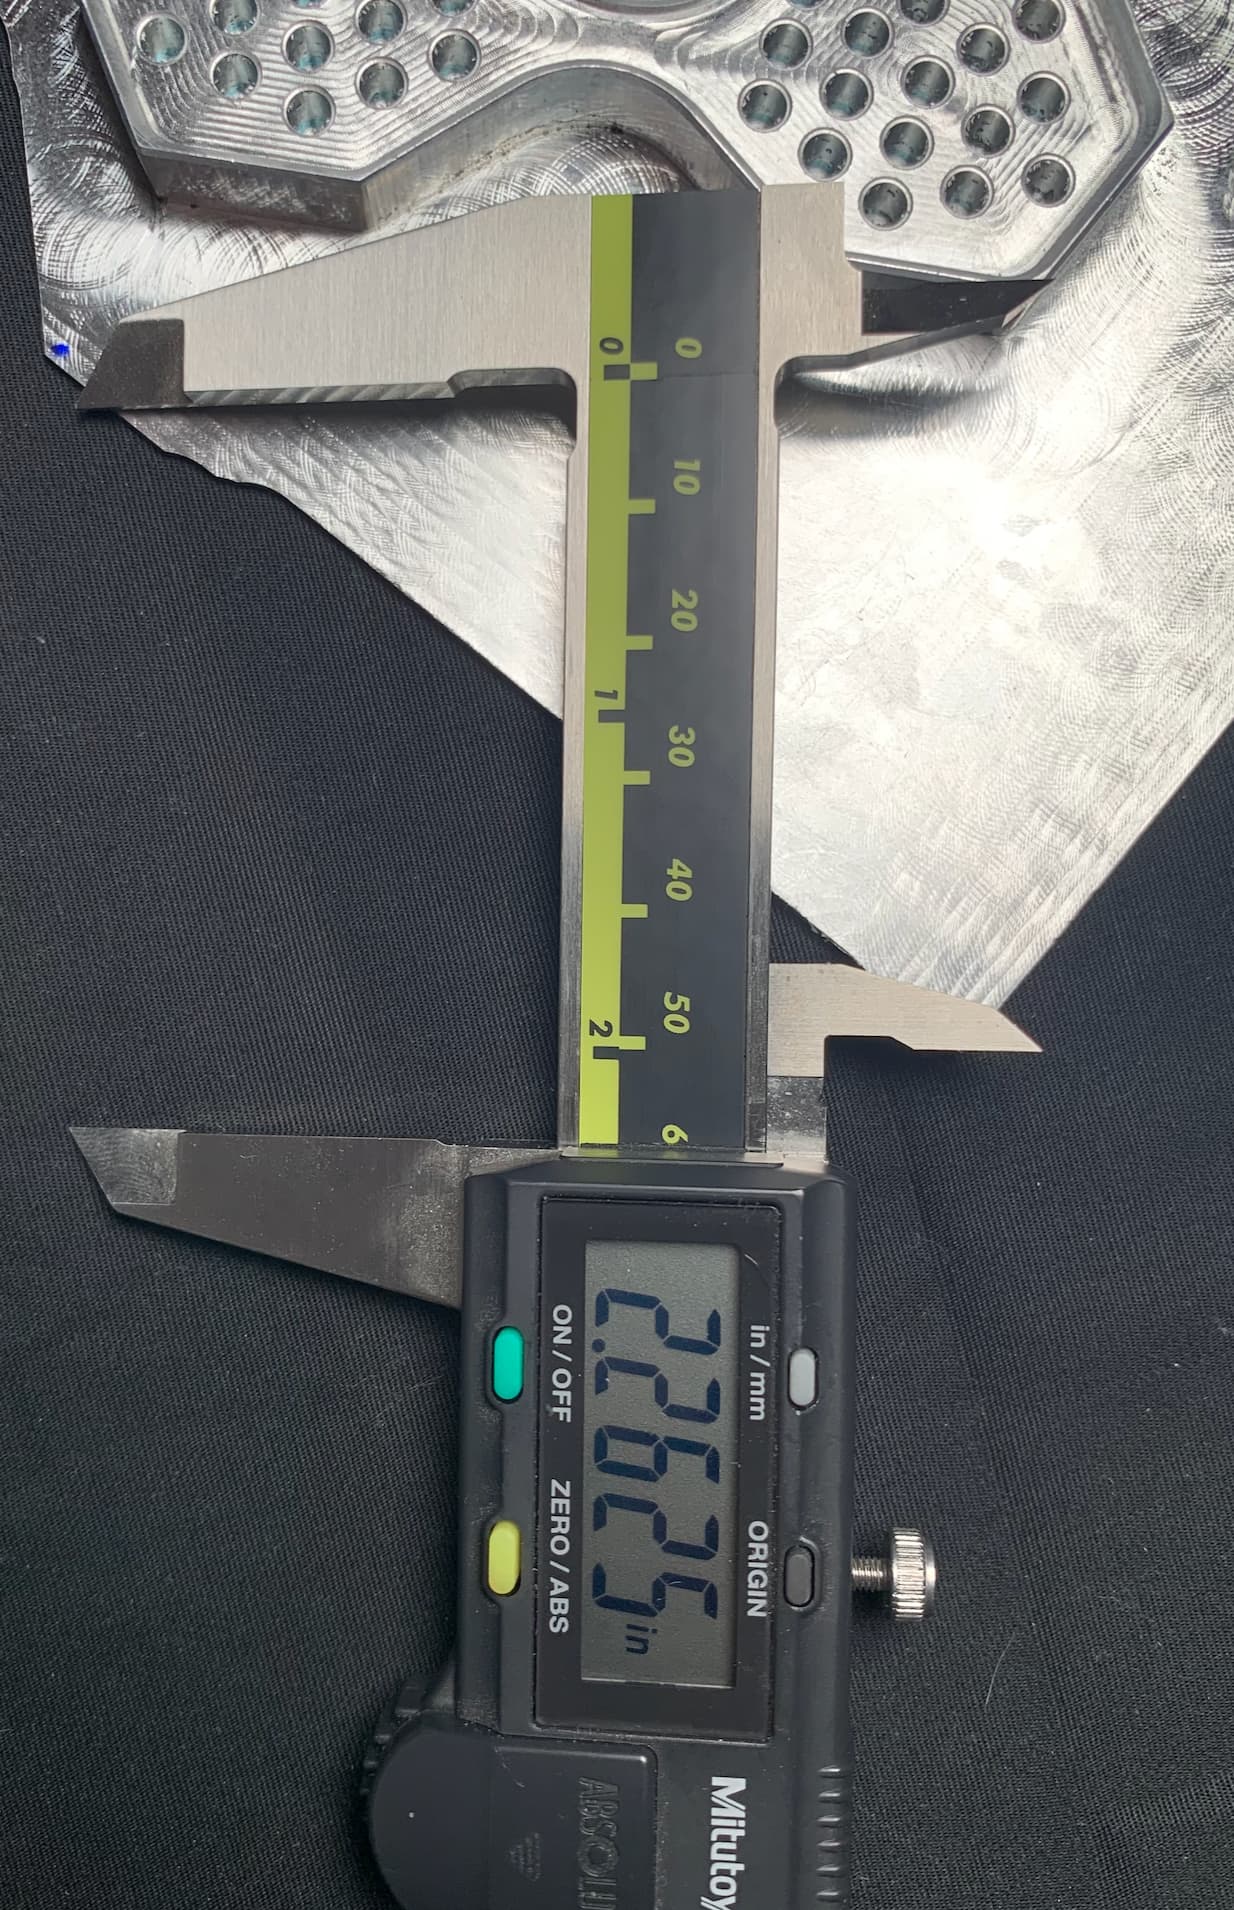 Rule of Thumb for How Thin You Can Mill? - MR-1 - Langmuir Systems Forum